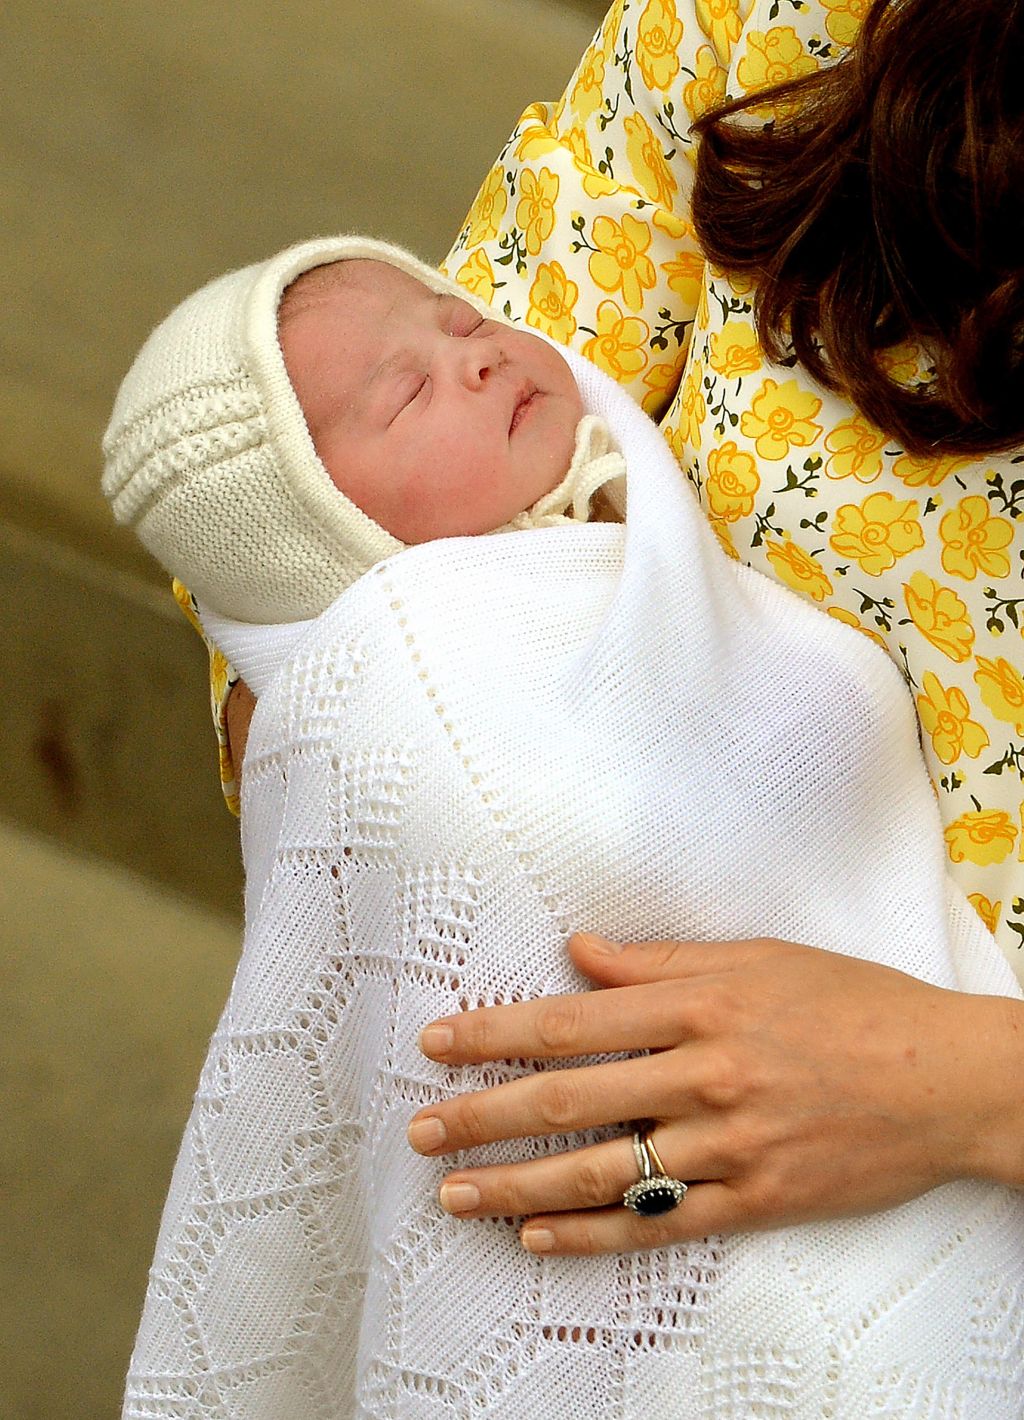 Kate Middleton & Prince William leave the hospital with their new baby girl